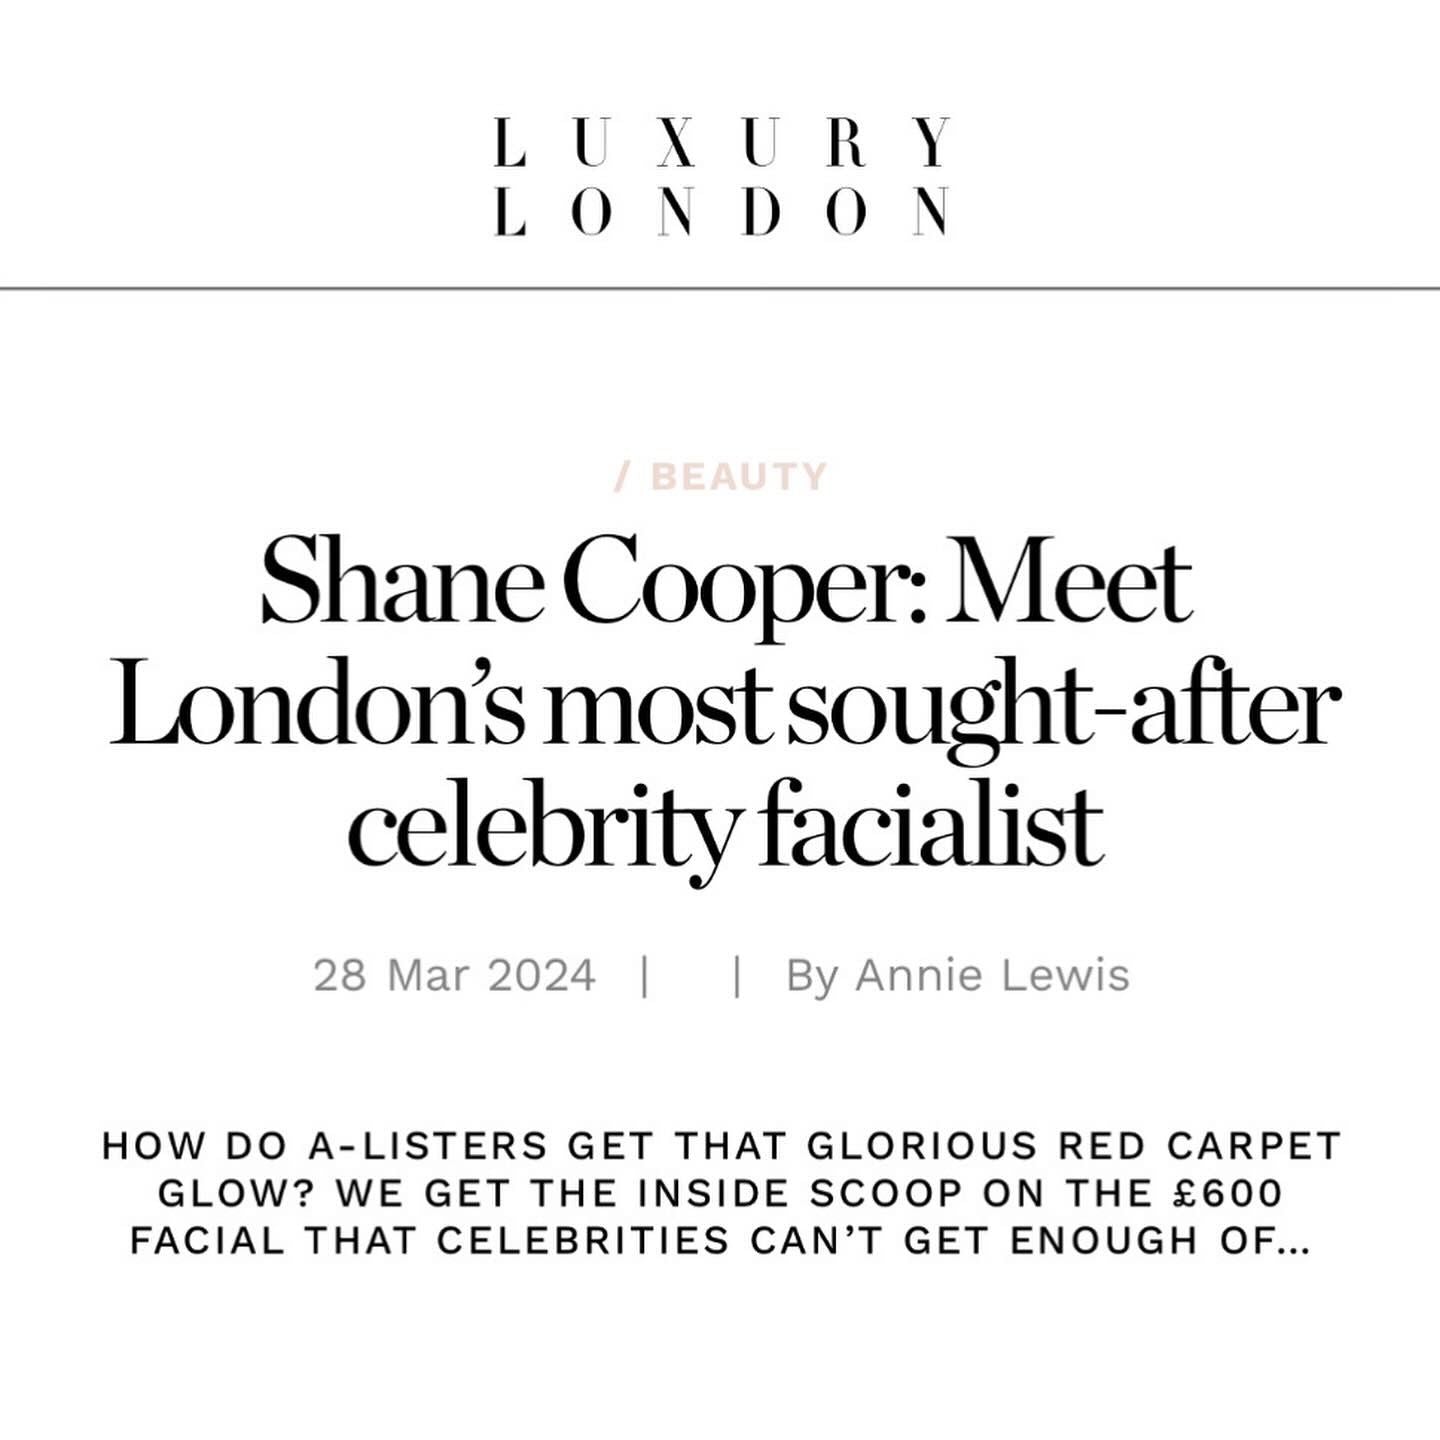 Shane Cooper Featured in Luxury London Article: Meet London’s most sought-after celebrity facialist